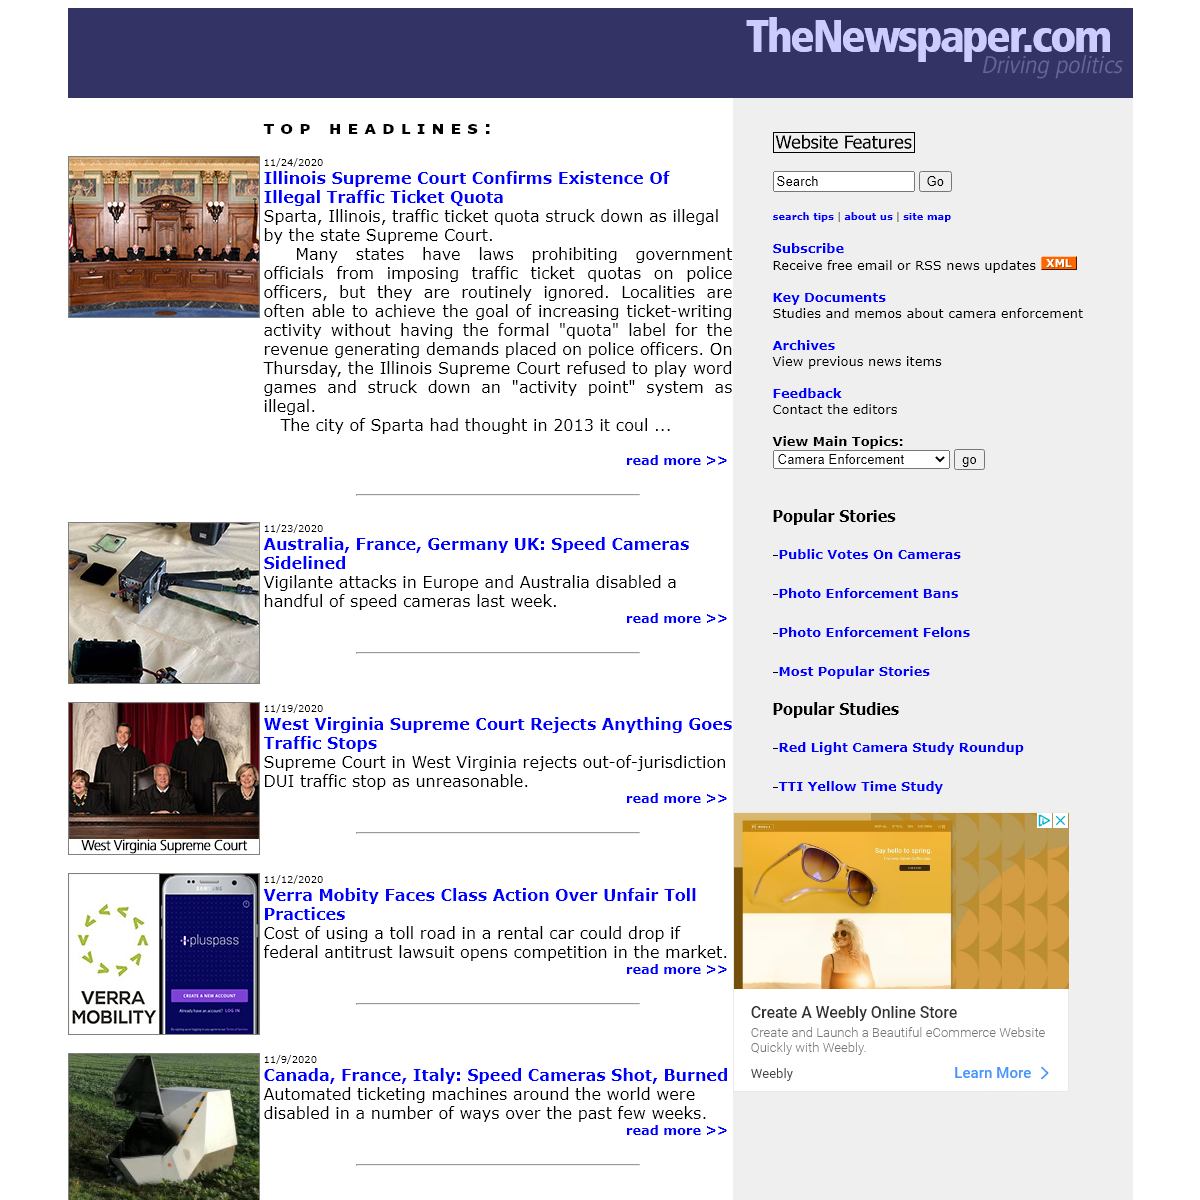 A complete backup of thenewspaper.com